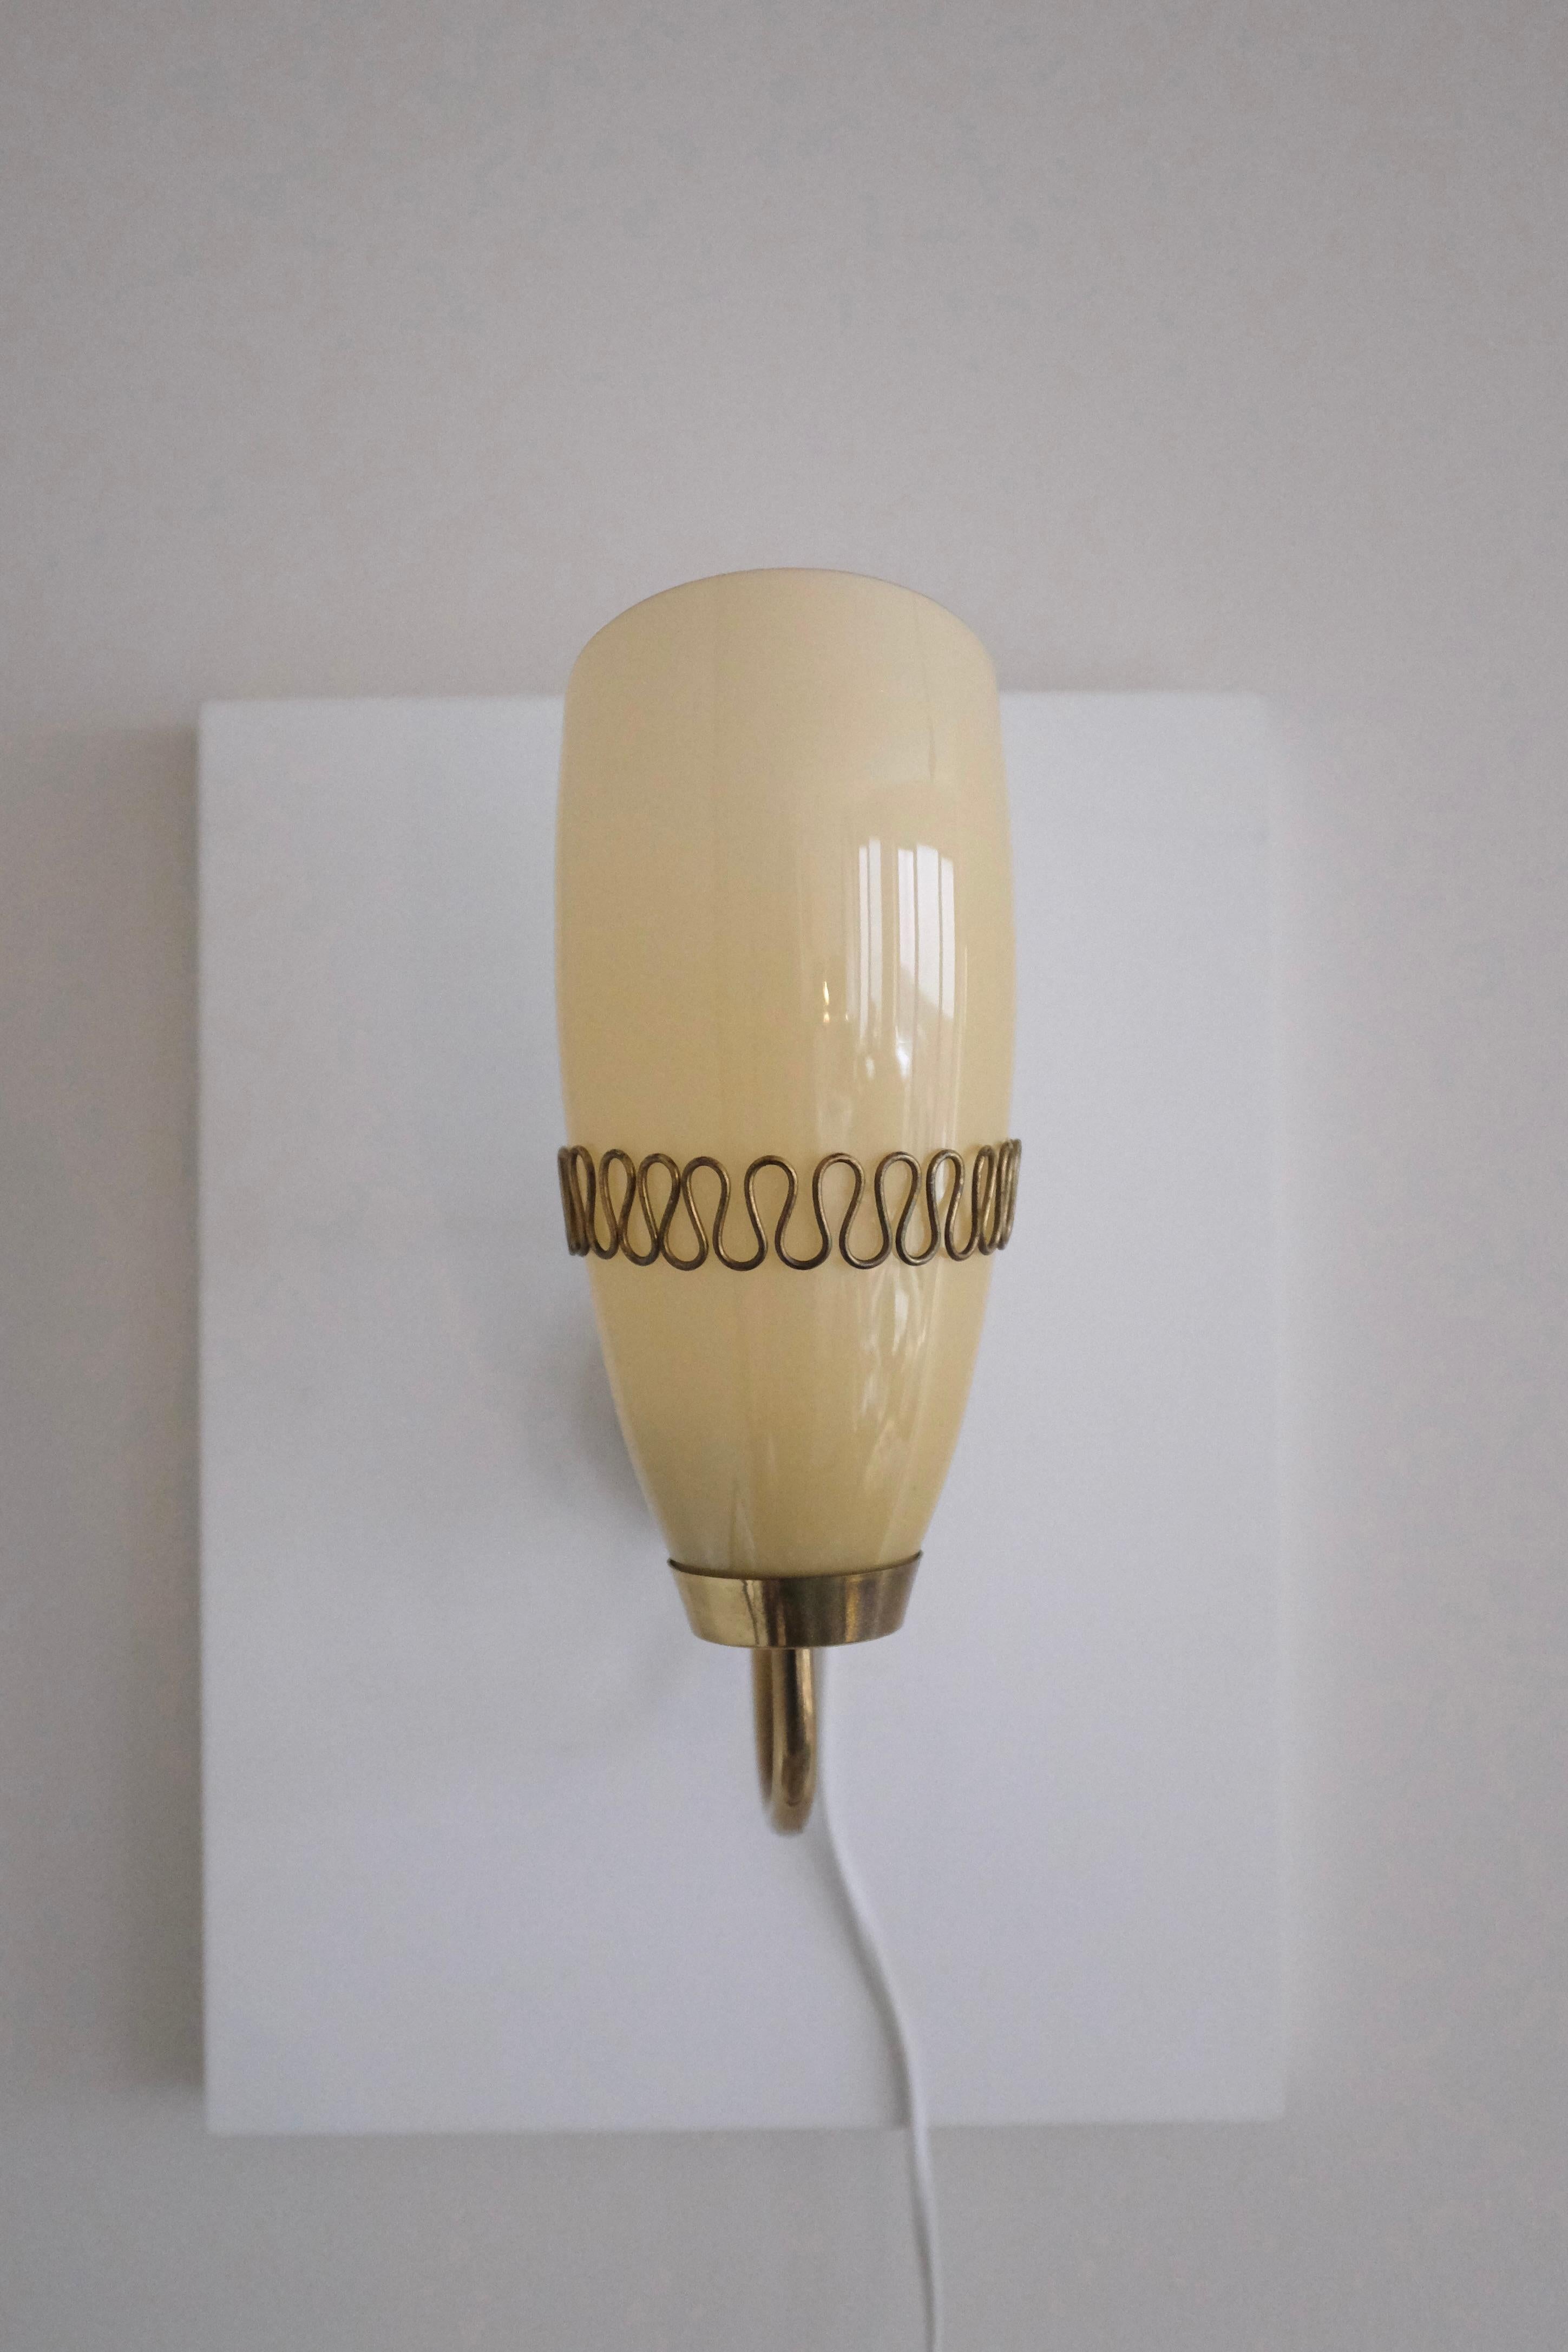 Beautiful Mid-Century Glass and Brass Wall light by Mauri Almari for Idman, Finland. Brass lamp arm with a filigree design that wraps around the oval shaped glass lantern in a beige color shade. Age appropriate wear to the brass with patina and two